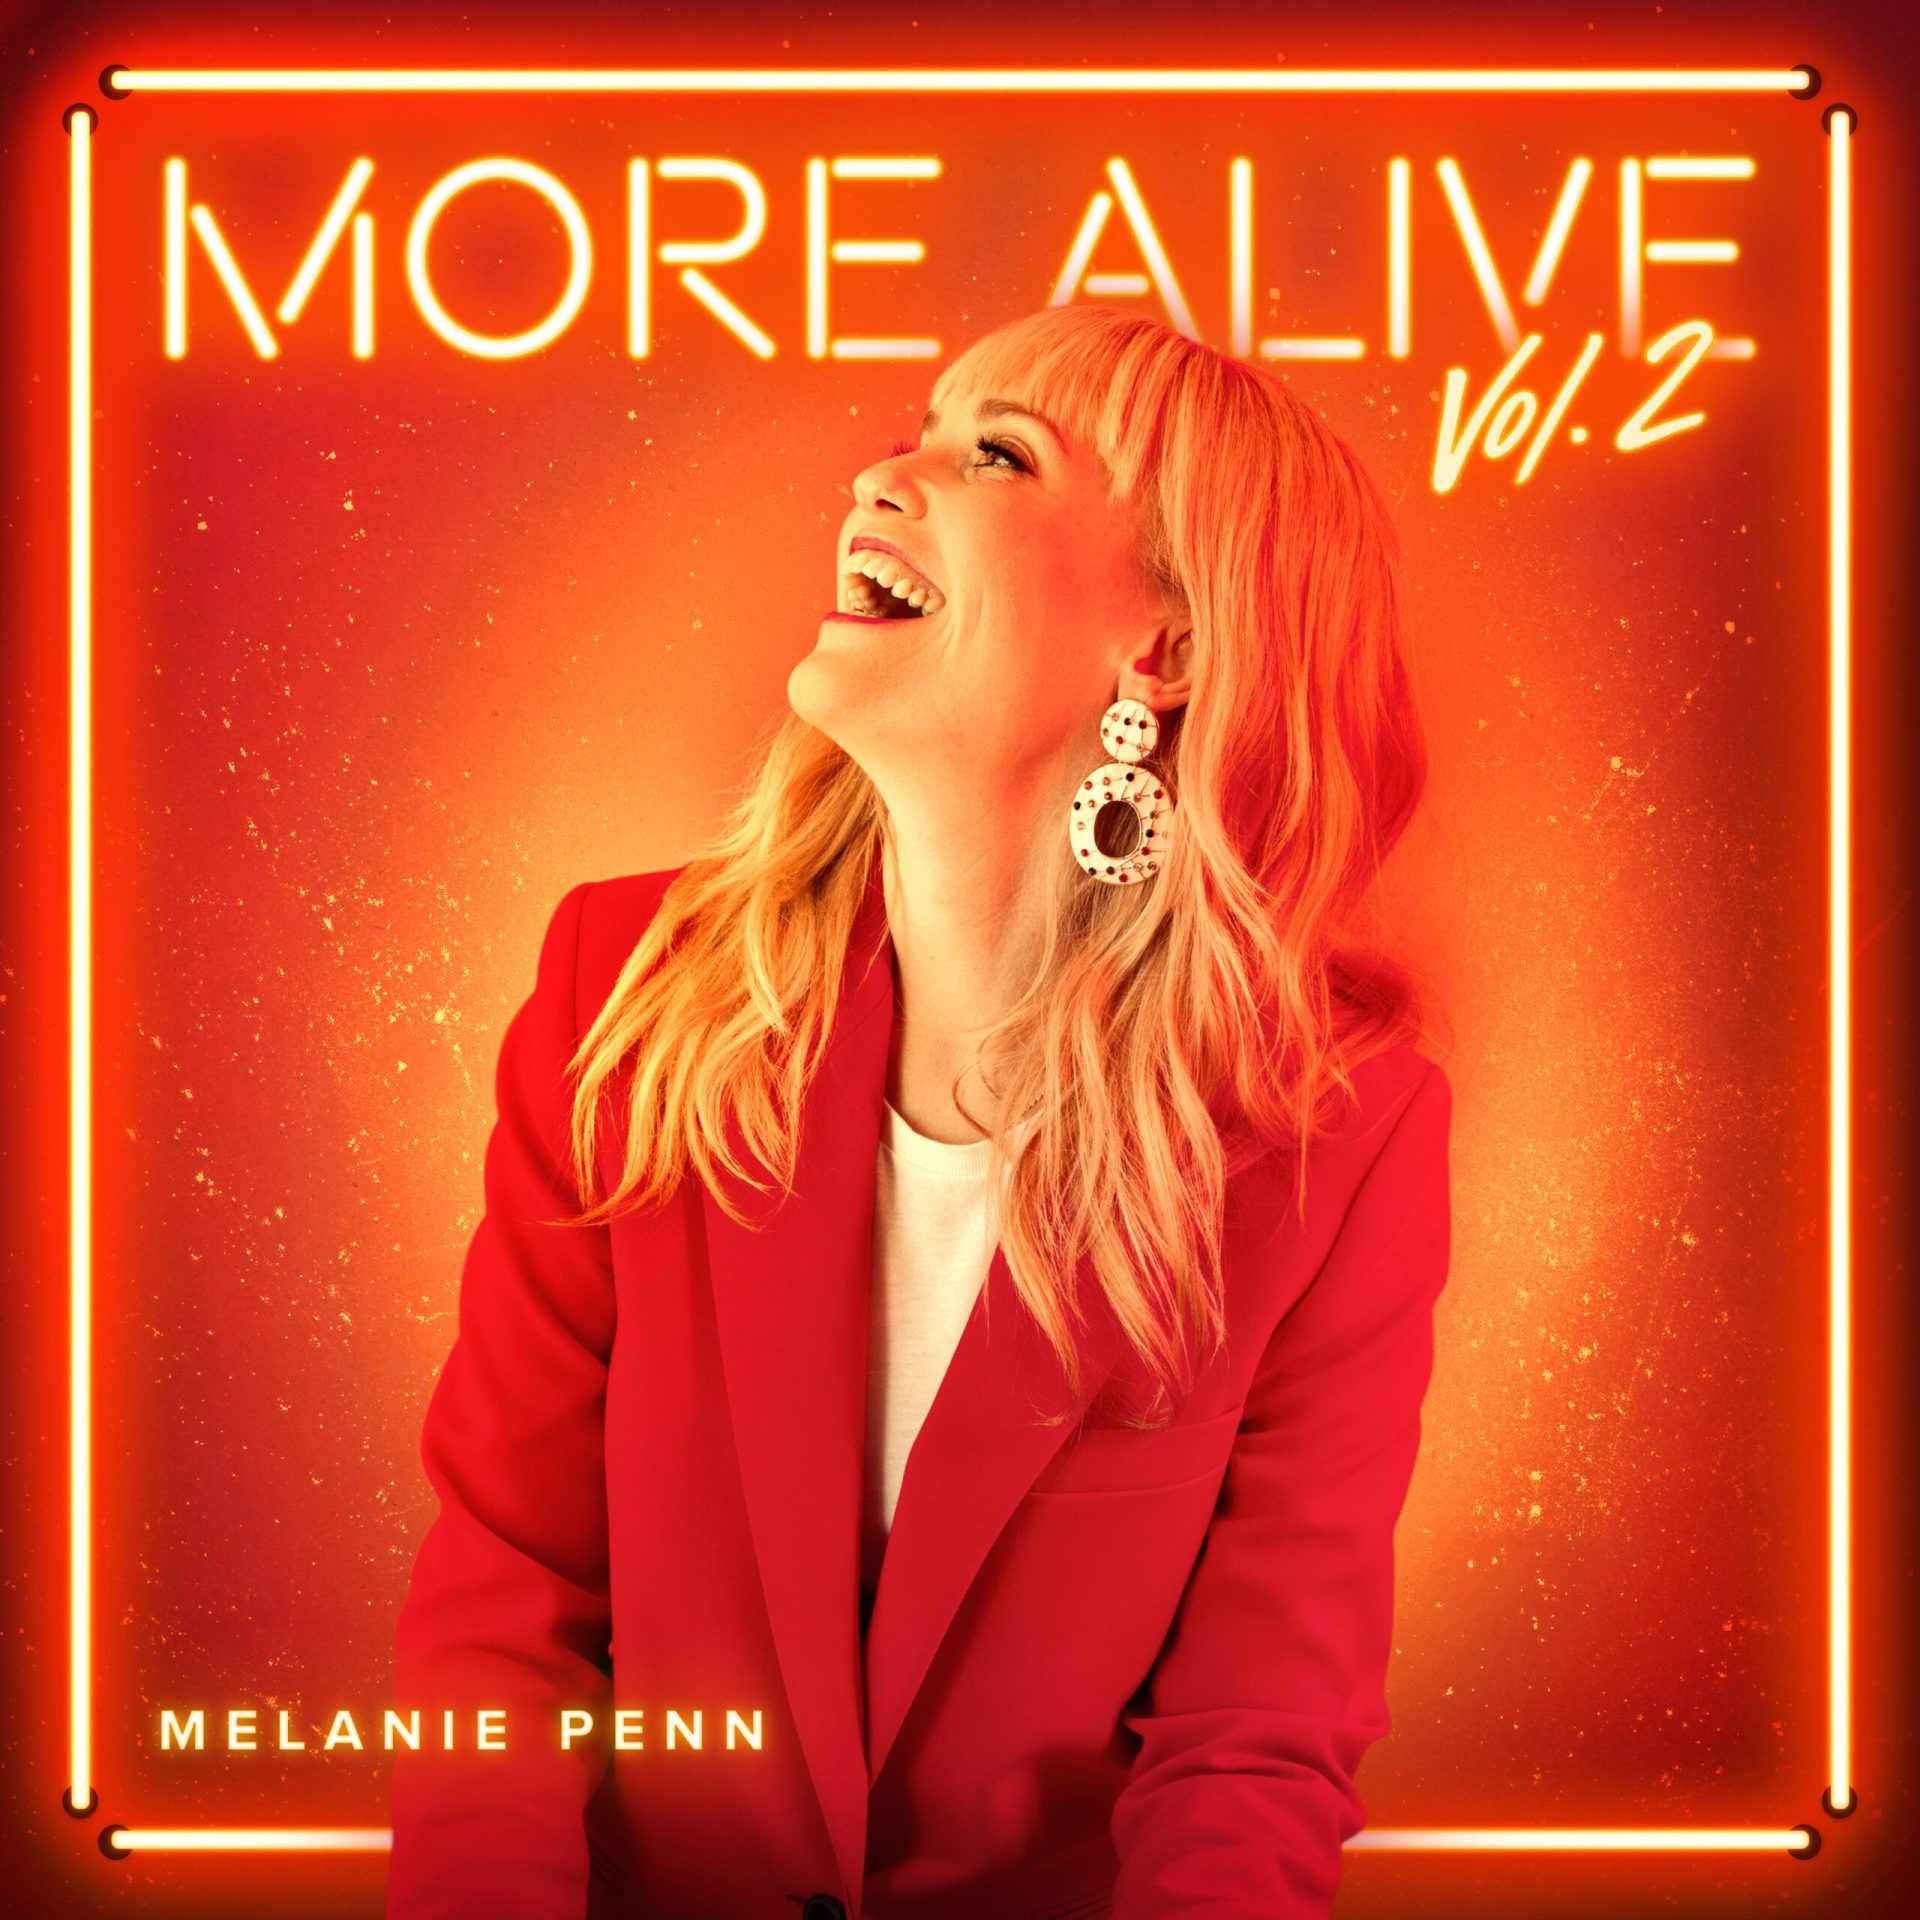 New Album “More Alive Vol 2” From Melanie Penn, Yours Truly, News, March 2, 2024